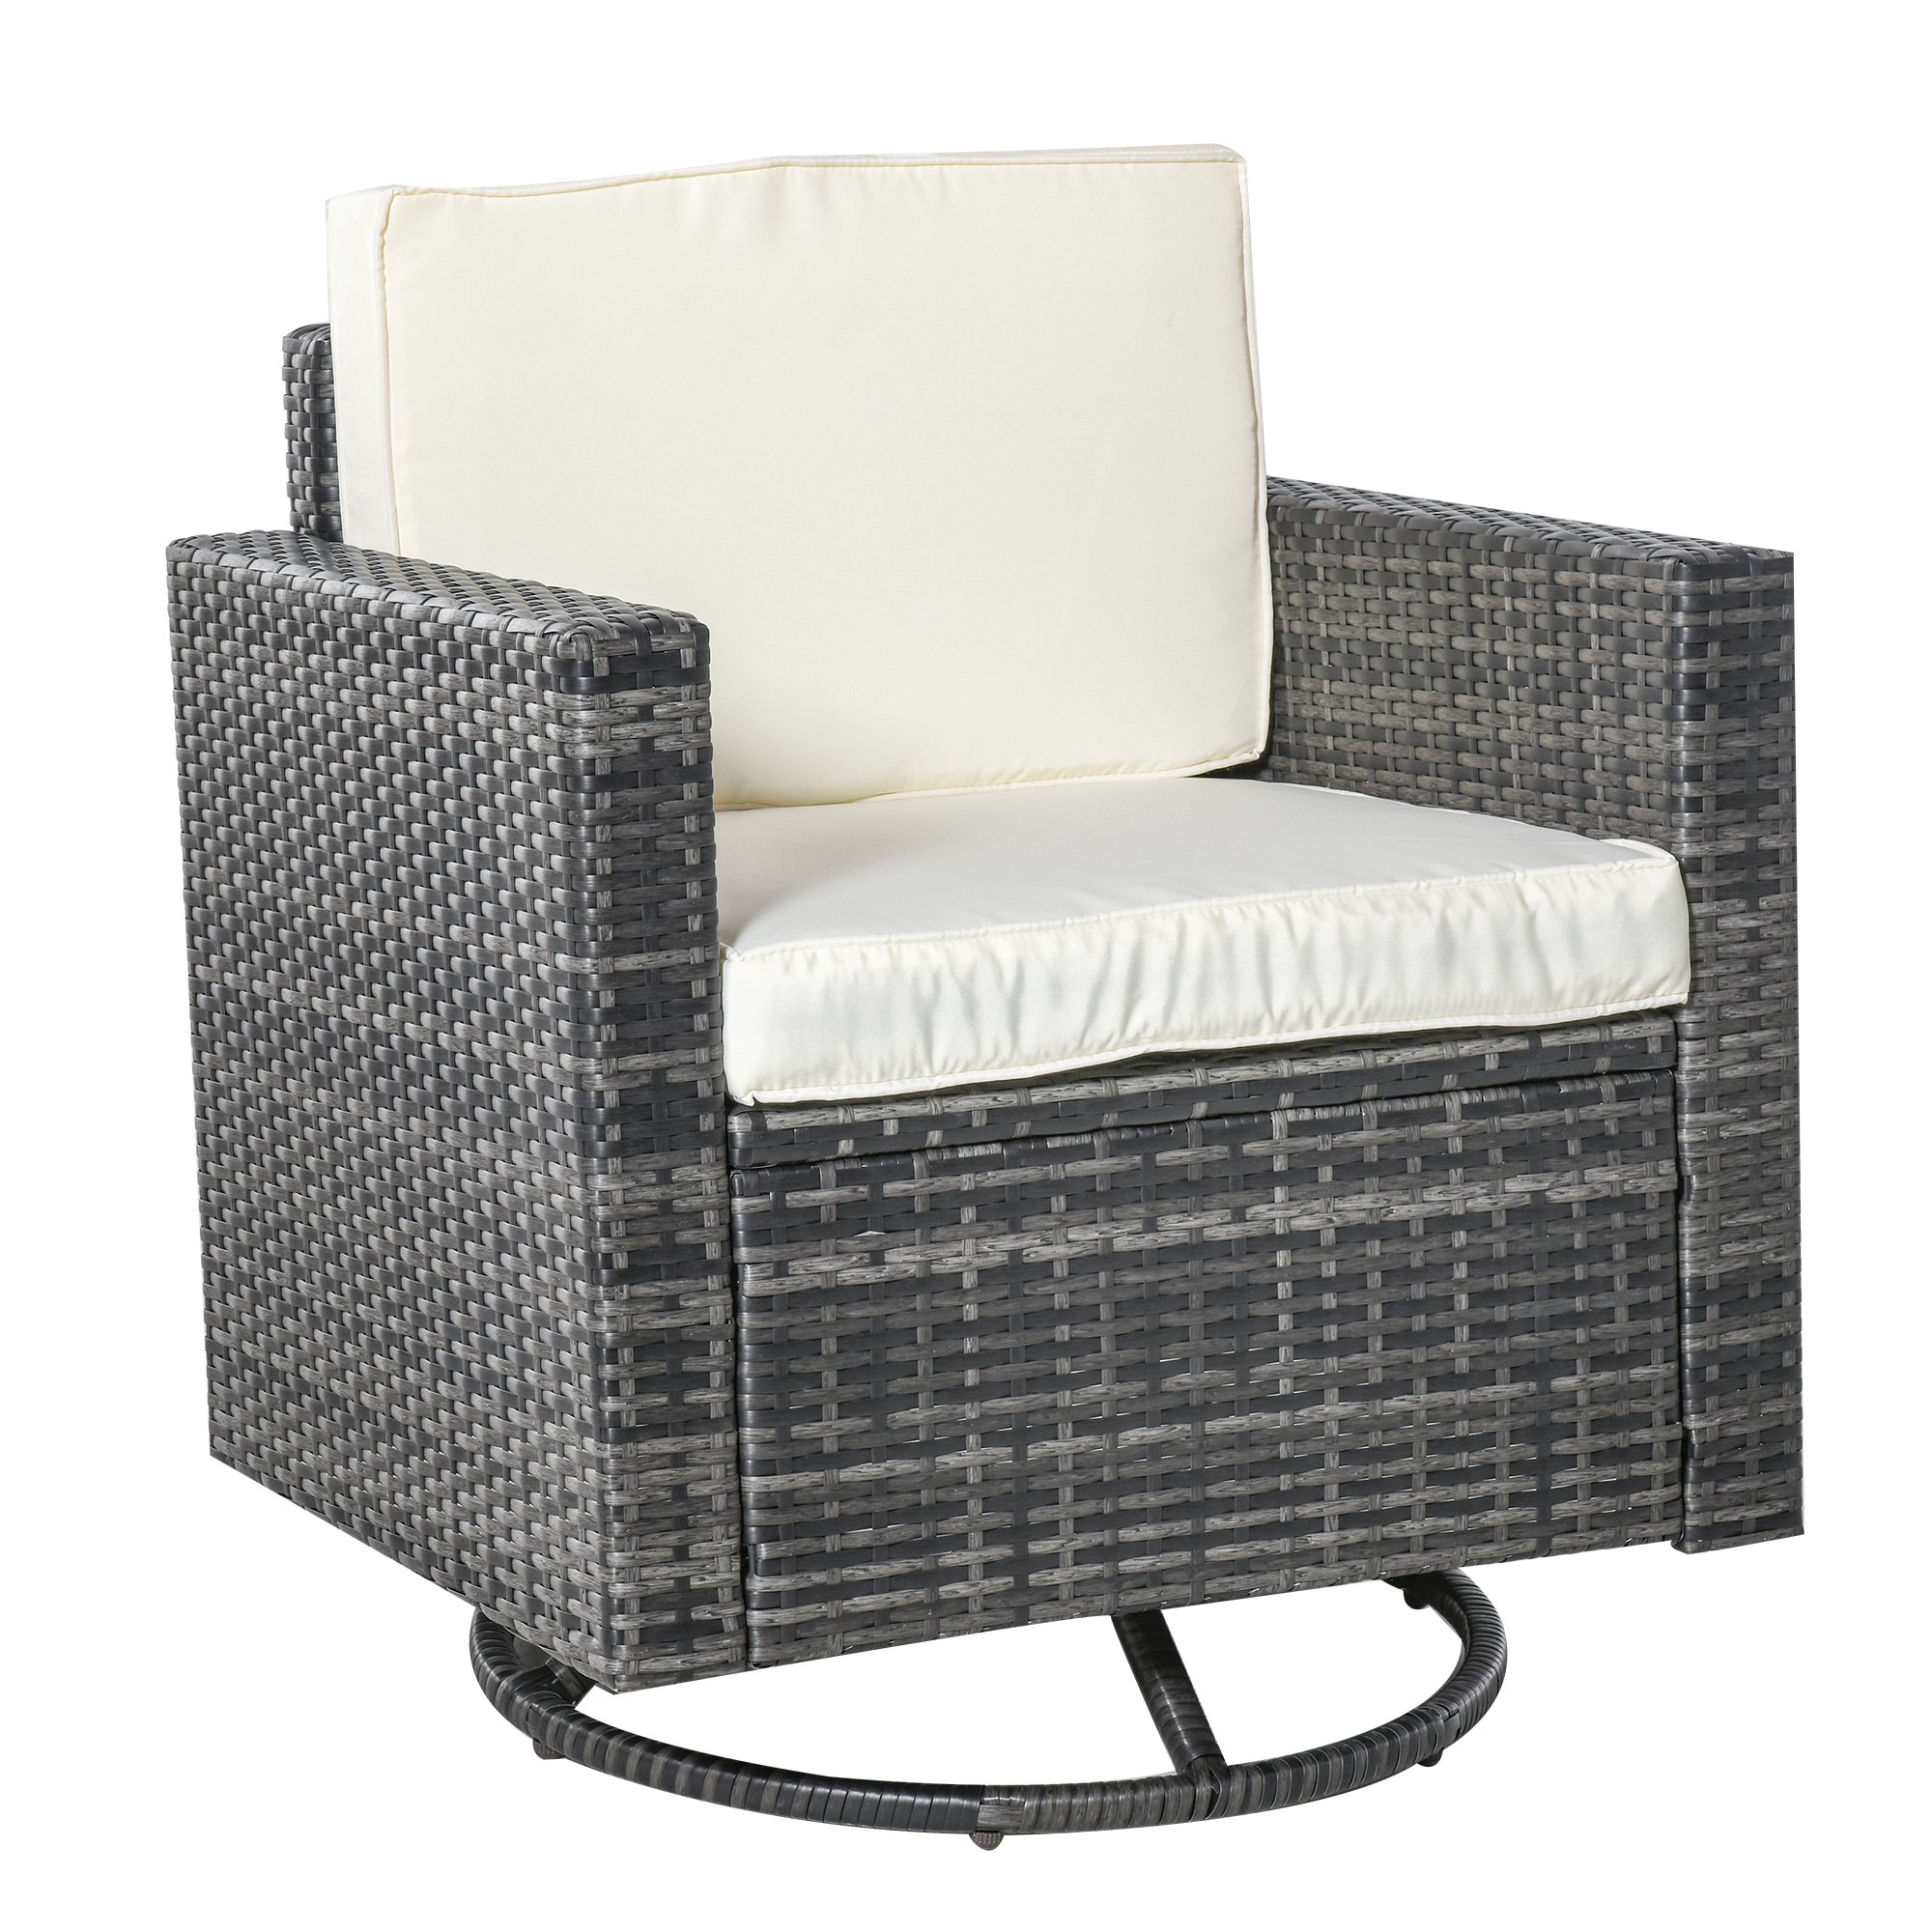 Outsunny Outdoor 360° Swivel PE Wicker Lounge Armchair with Thick Soft Padded Cushions & Strong Steel Frame, Cream White